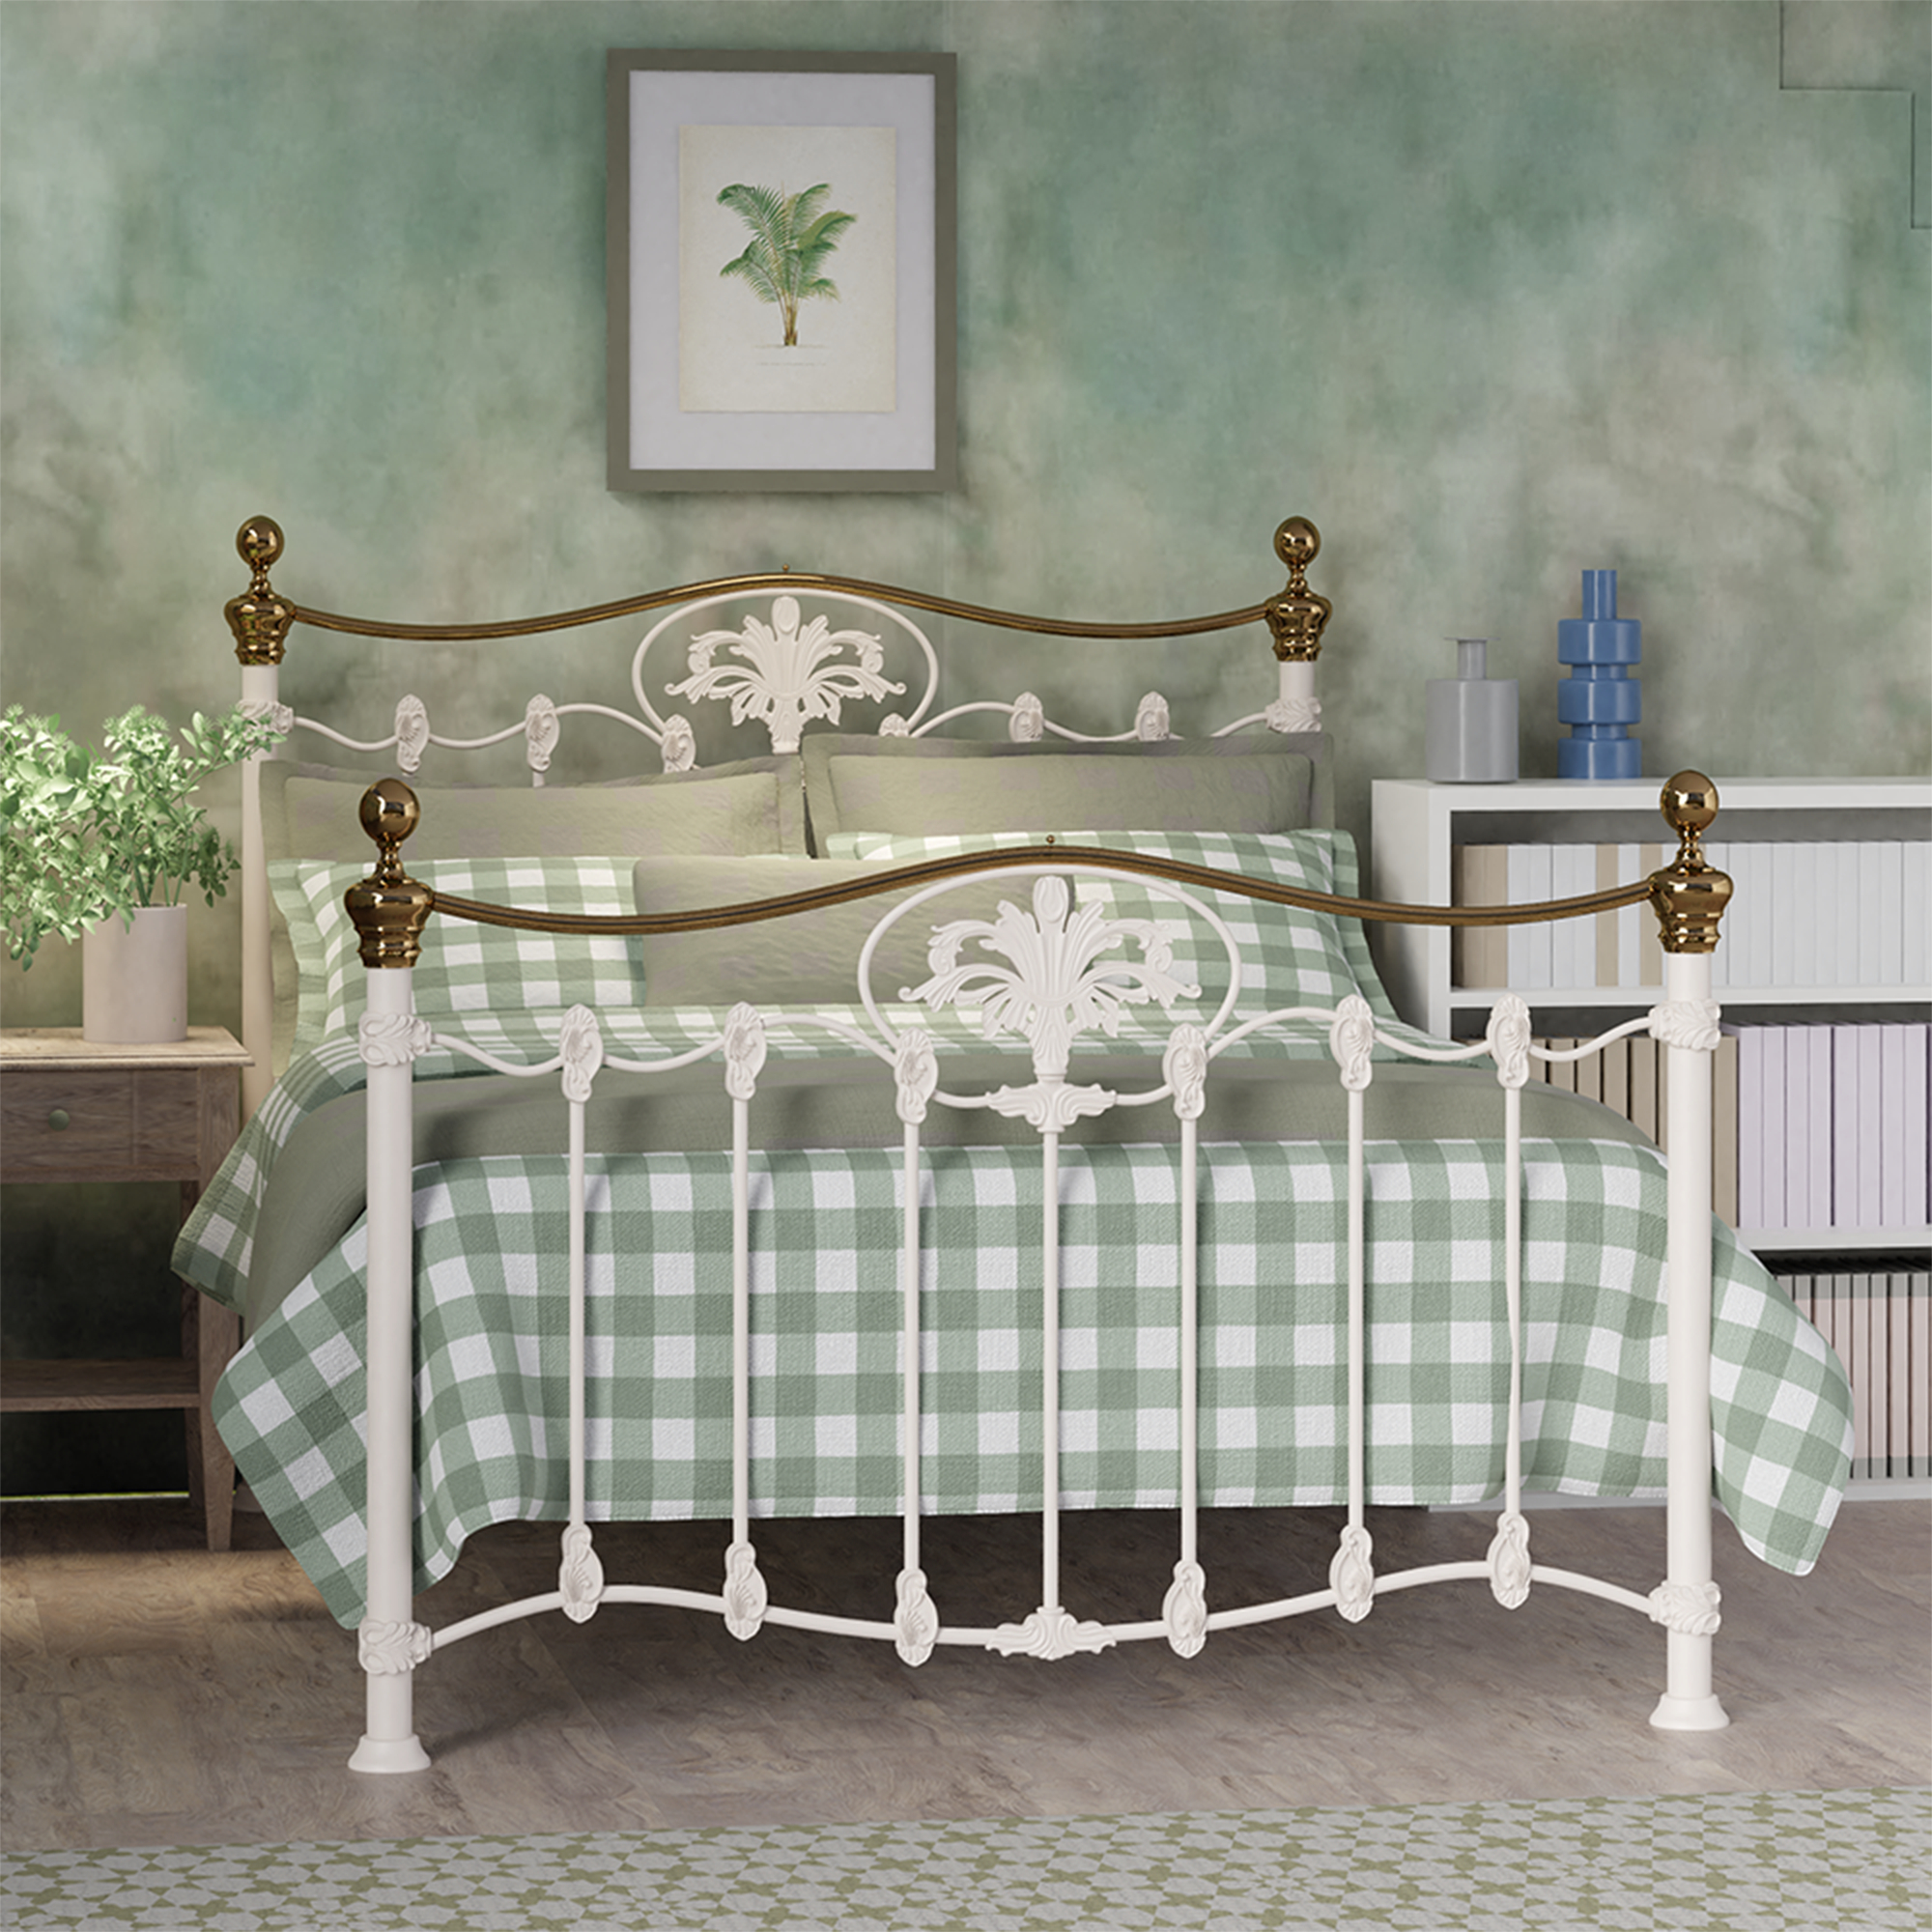 Camolin iron bed - Image green white